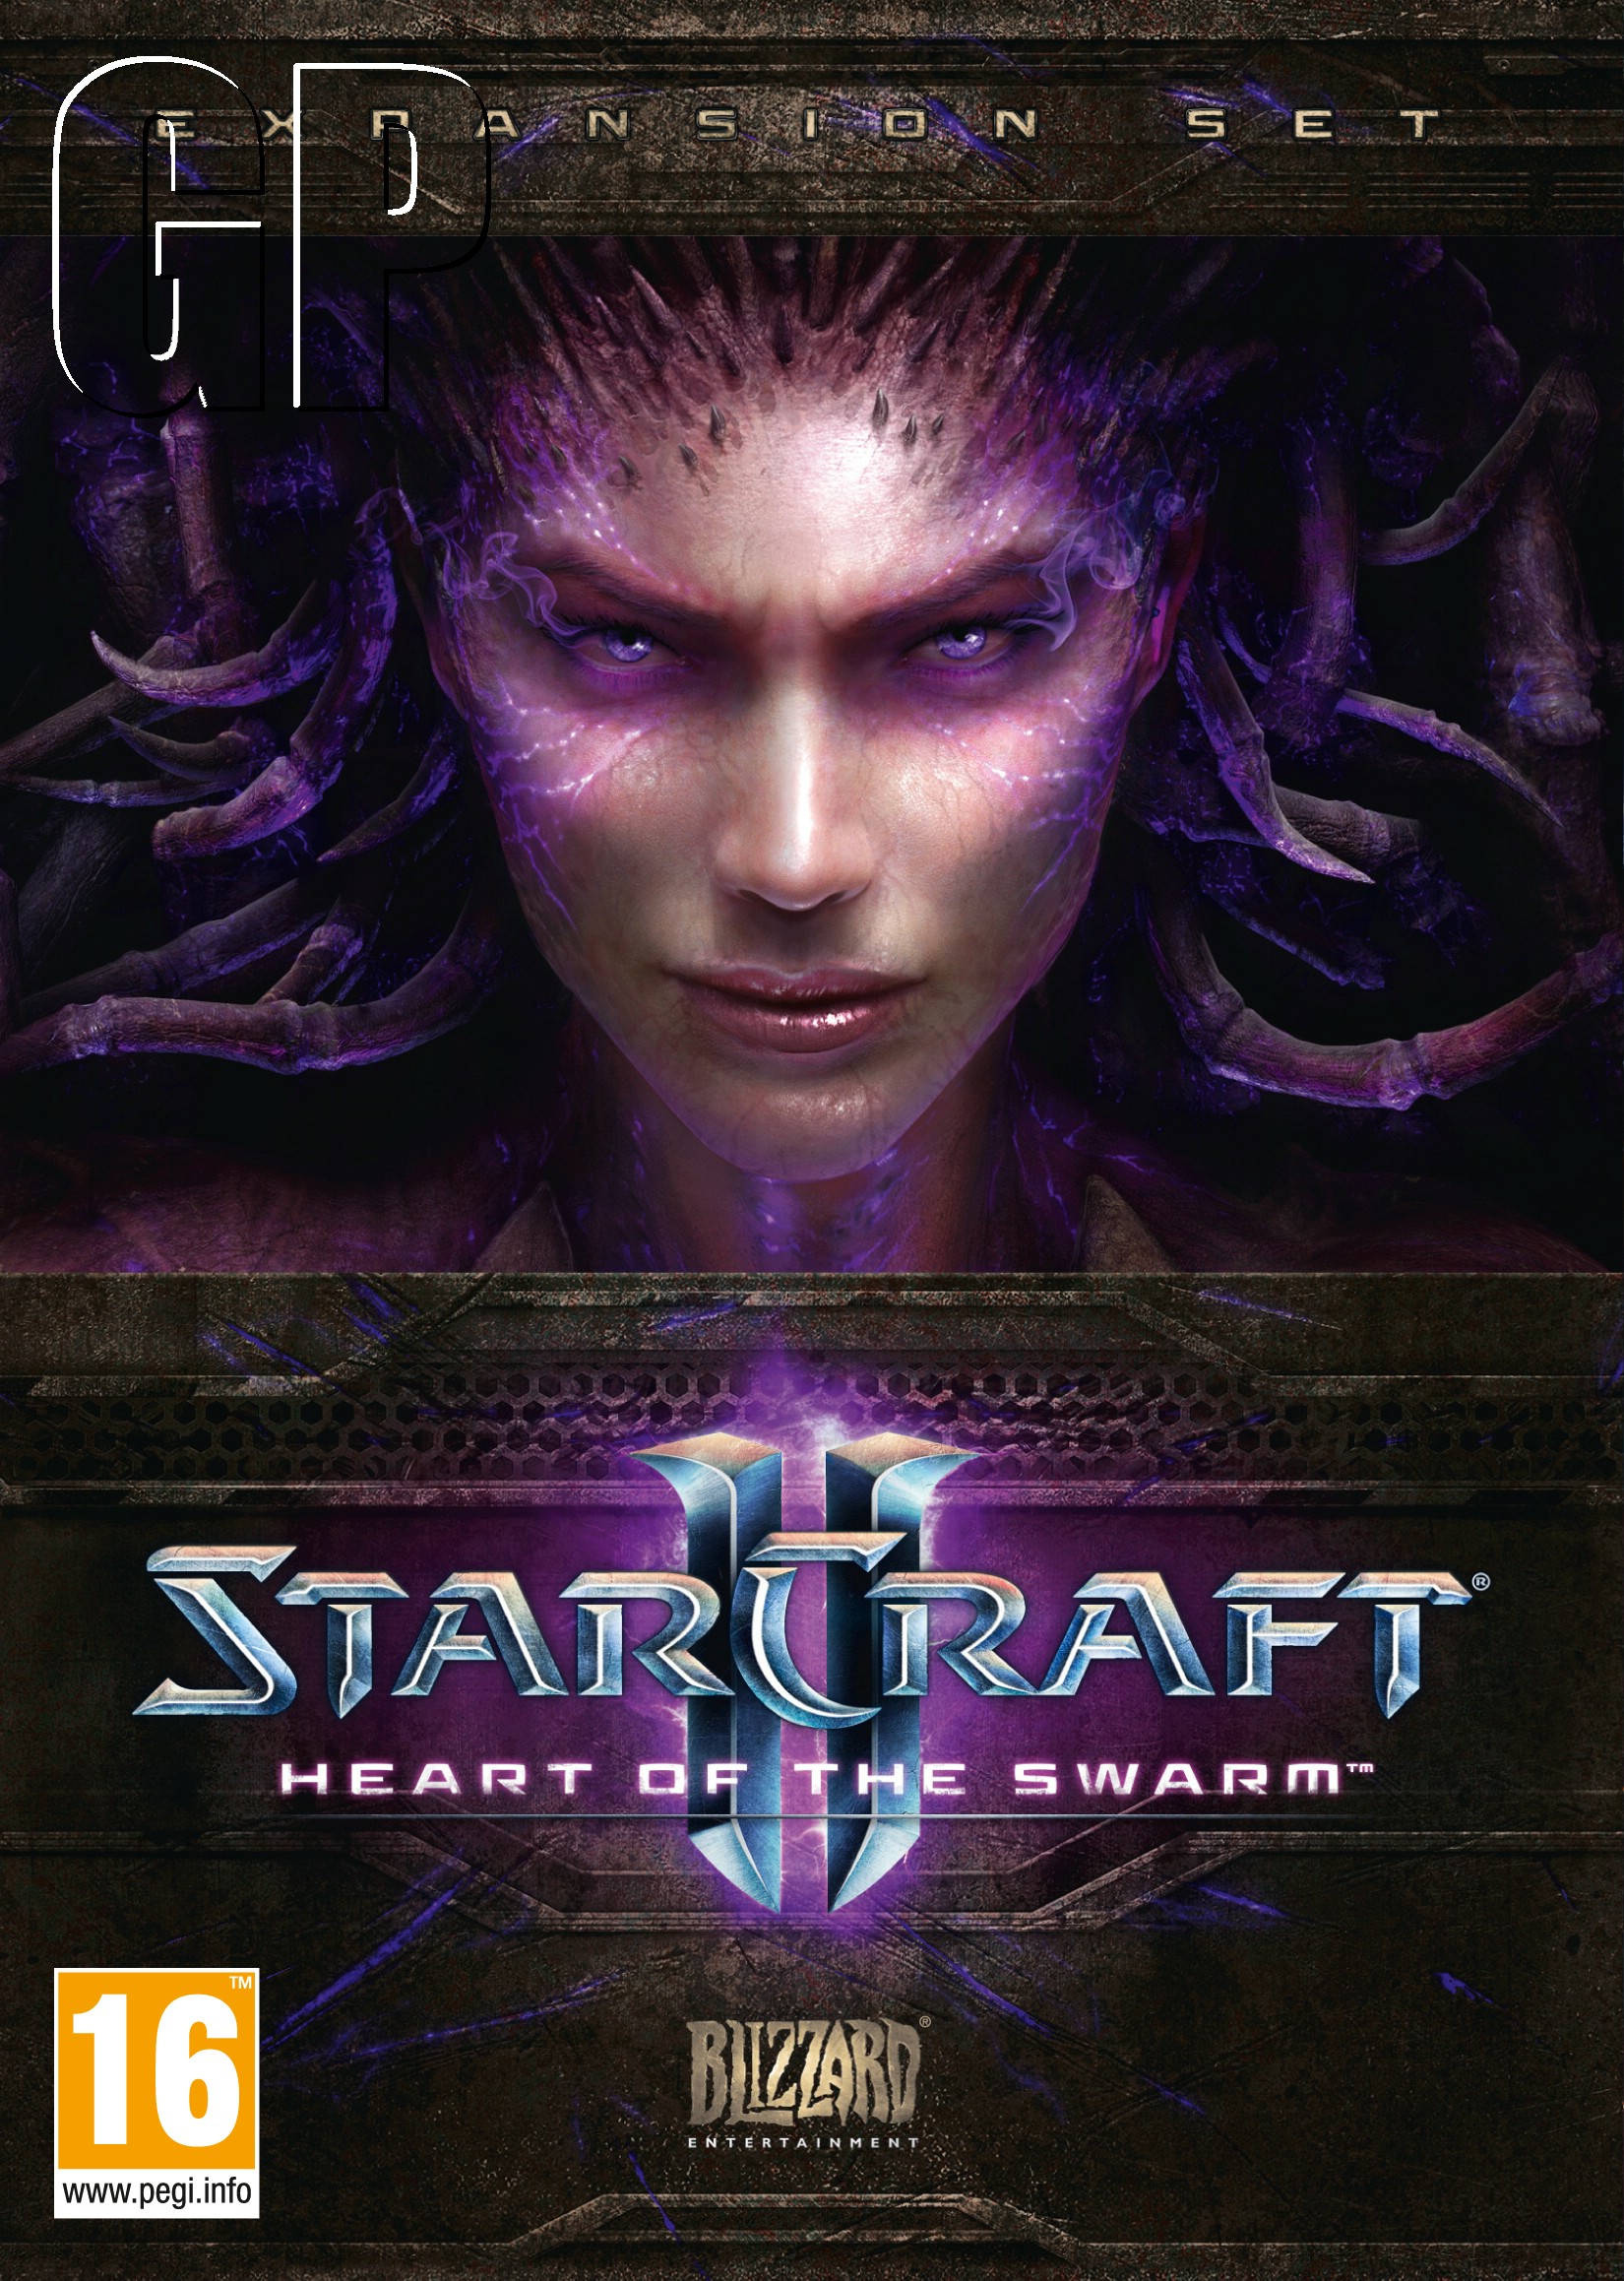 StarCraft II: Heart of the Swarm DLC announced - GameConnect